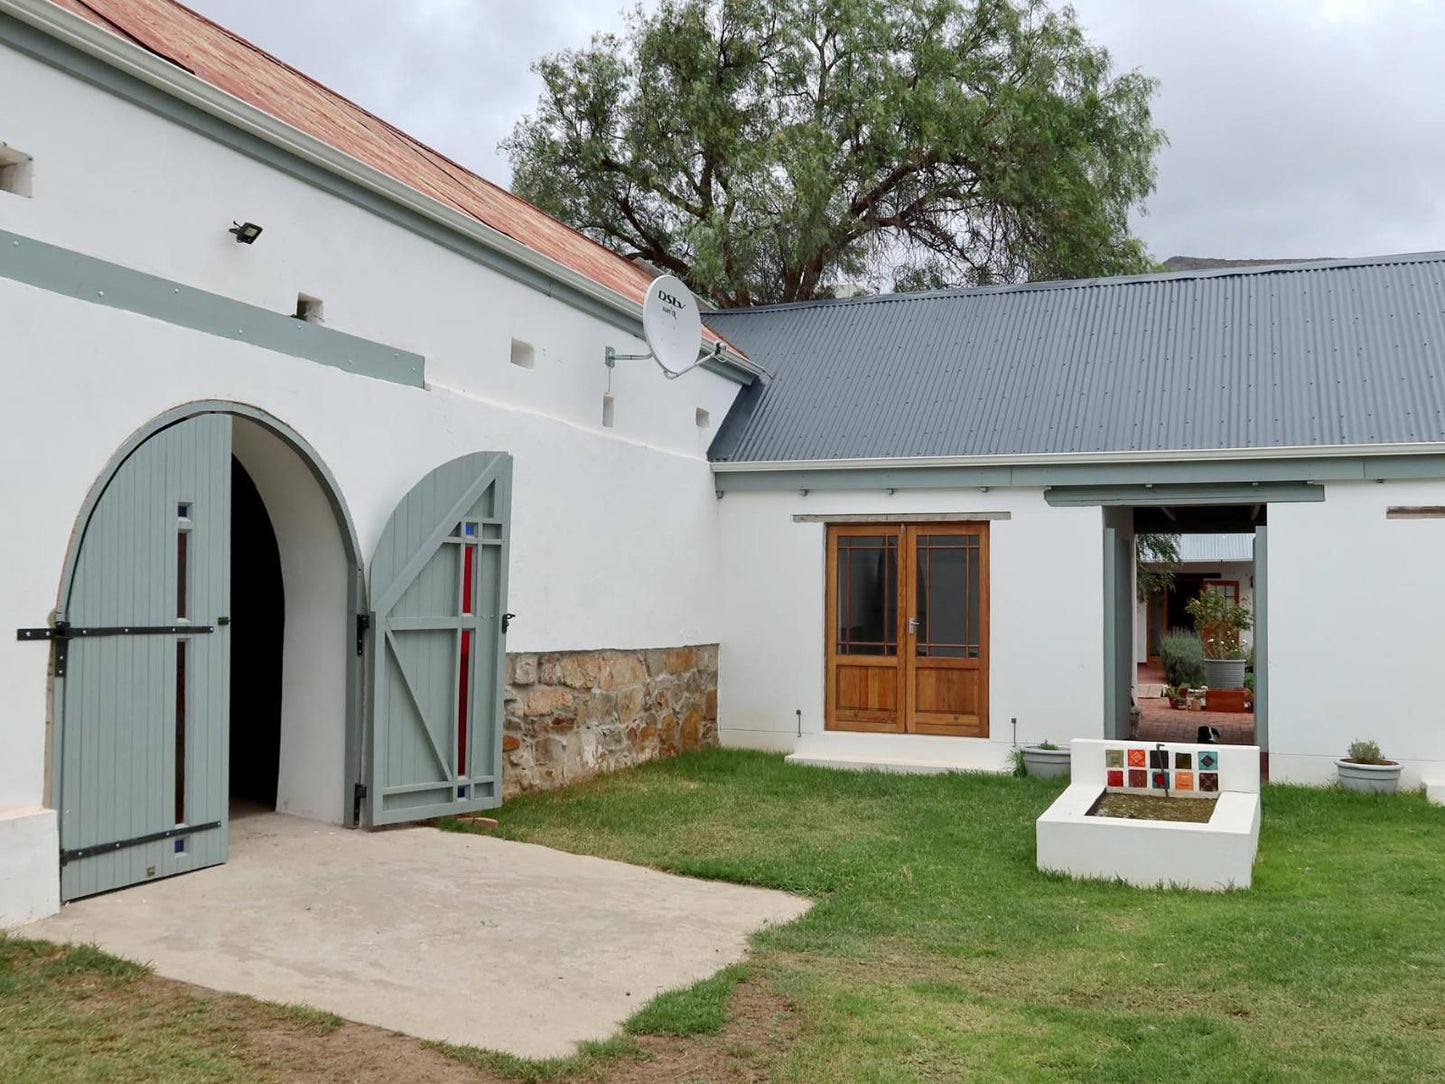 De Bos Backpackersand Camping Montagu Western Cape South Africa House, Building, Architecture